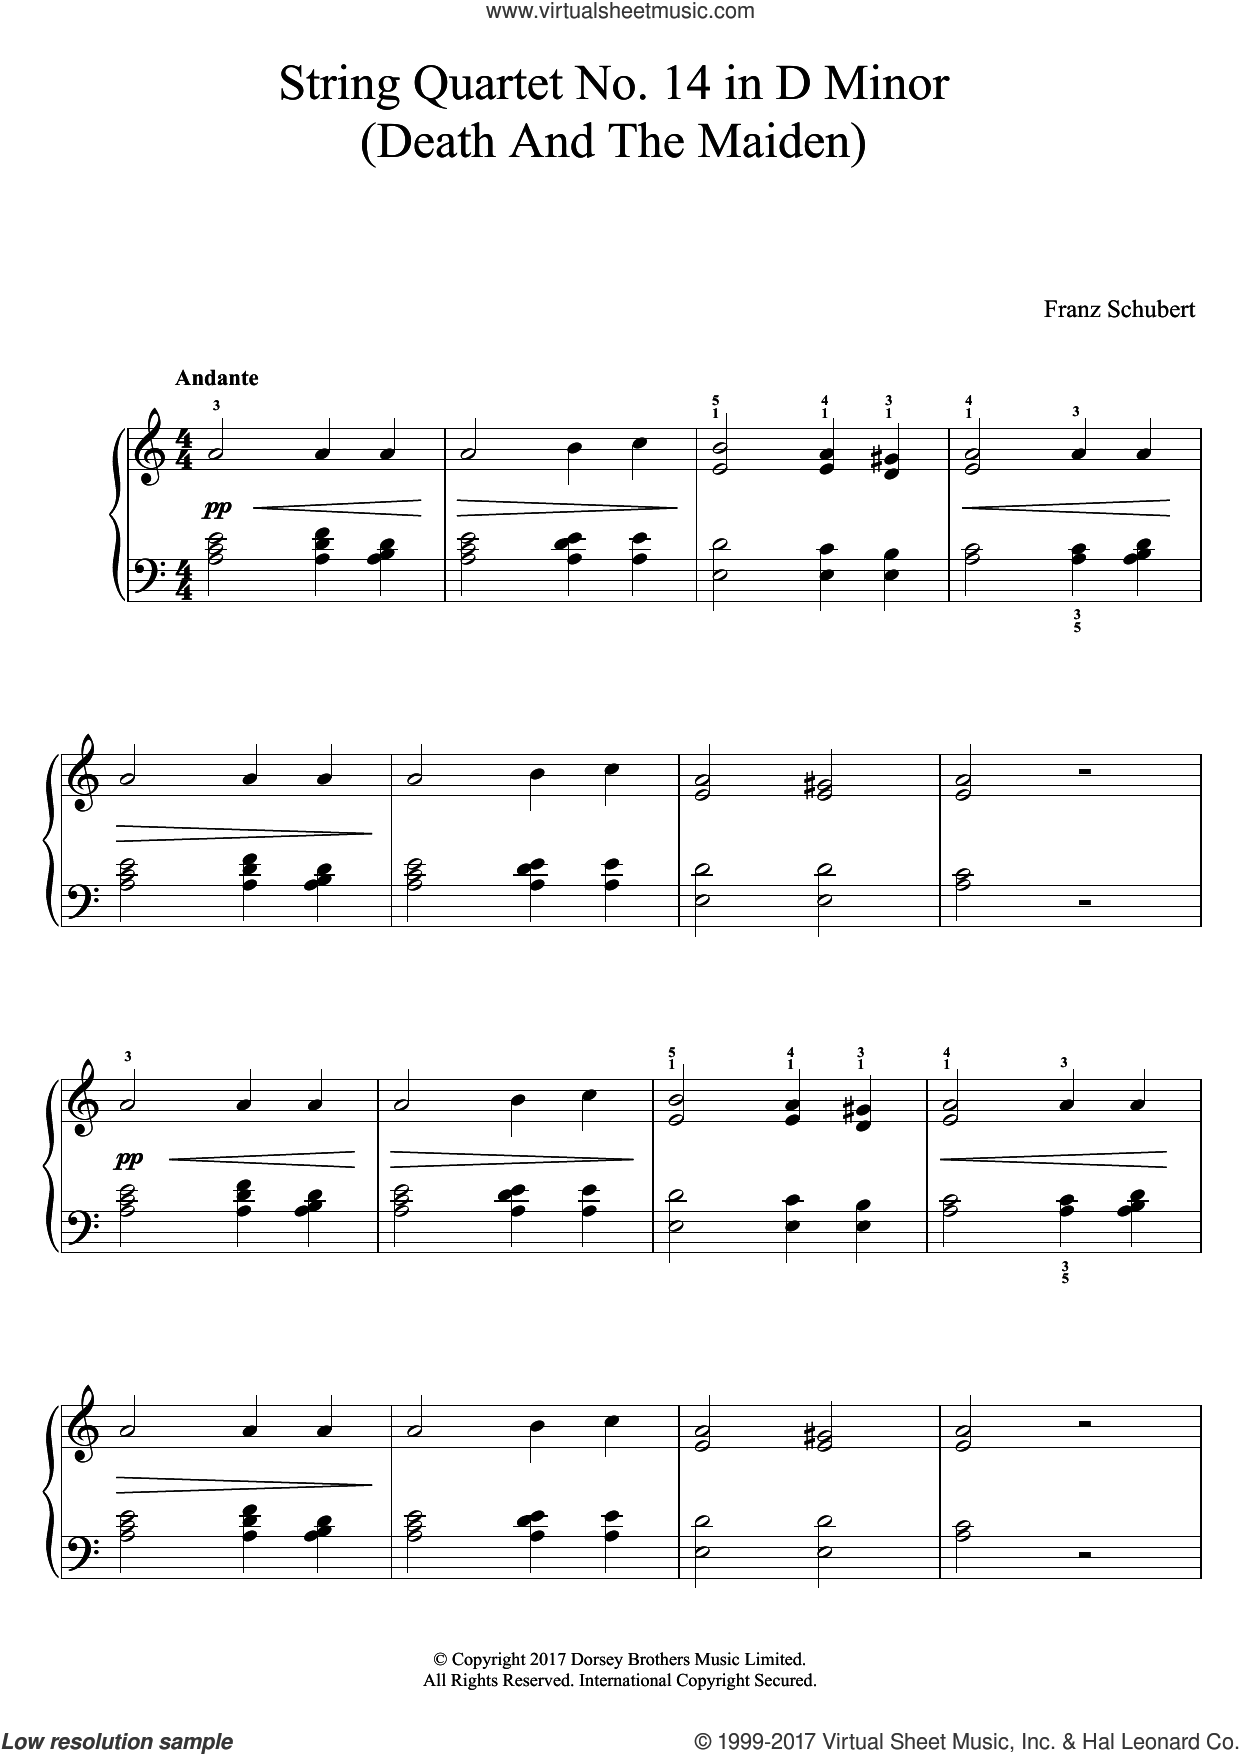 Dance of death - Iron Maiden for piano Sheet music for Piano (Solo